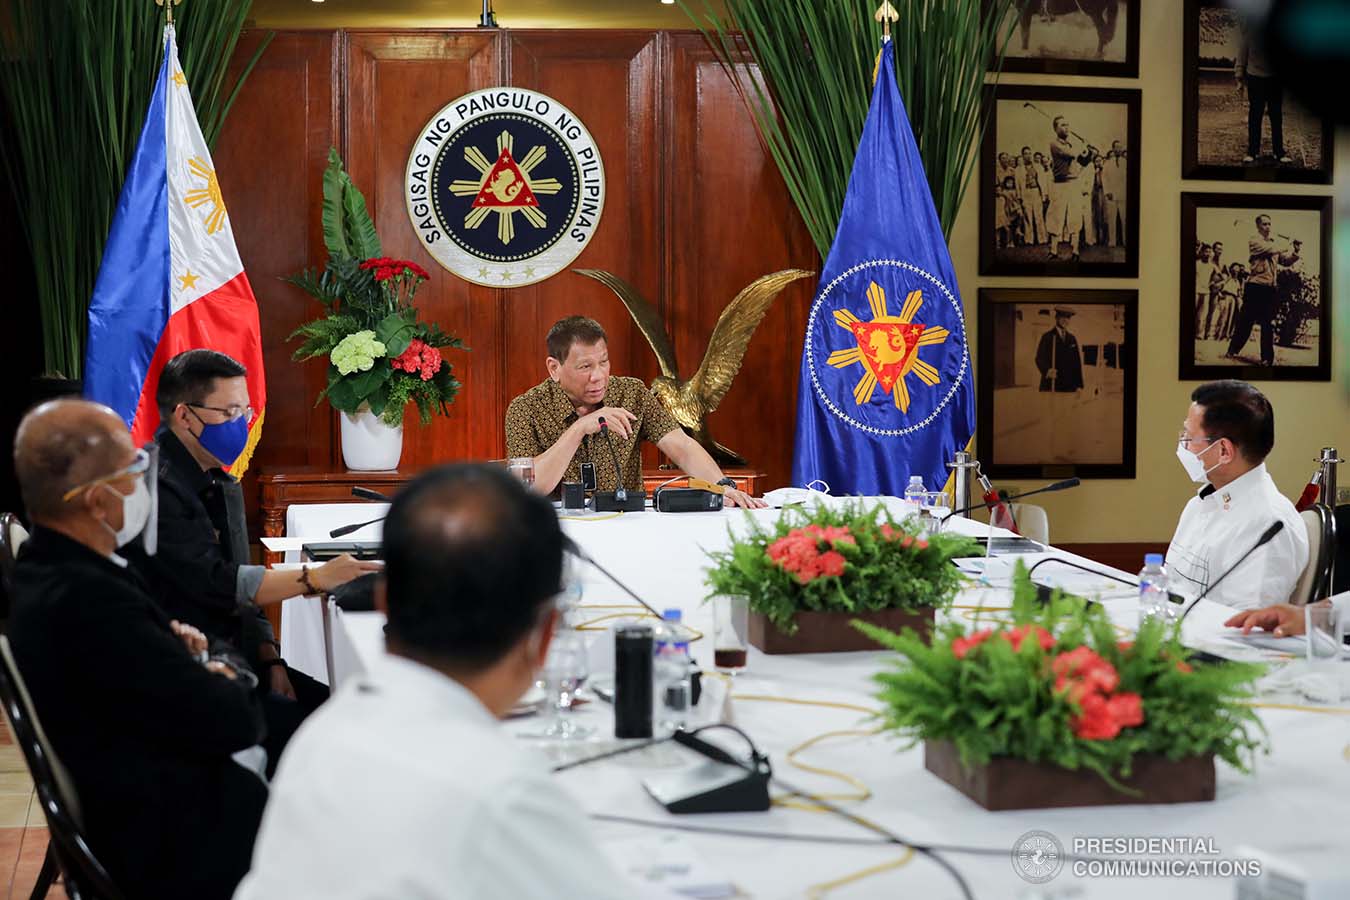 President Rodrigo Roa Duterte presides over a meeting with the Inter-Agency Task Force on the Emerging Infectious Diseases (IATF-EID) core members prior to his talk to the people at the Malago Clubhouse in Malacañang on September 28, 2020. ROBINSON NIÑAL/ PRESIDENTIAL PHOTO